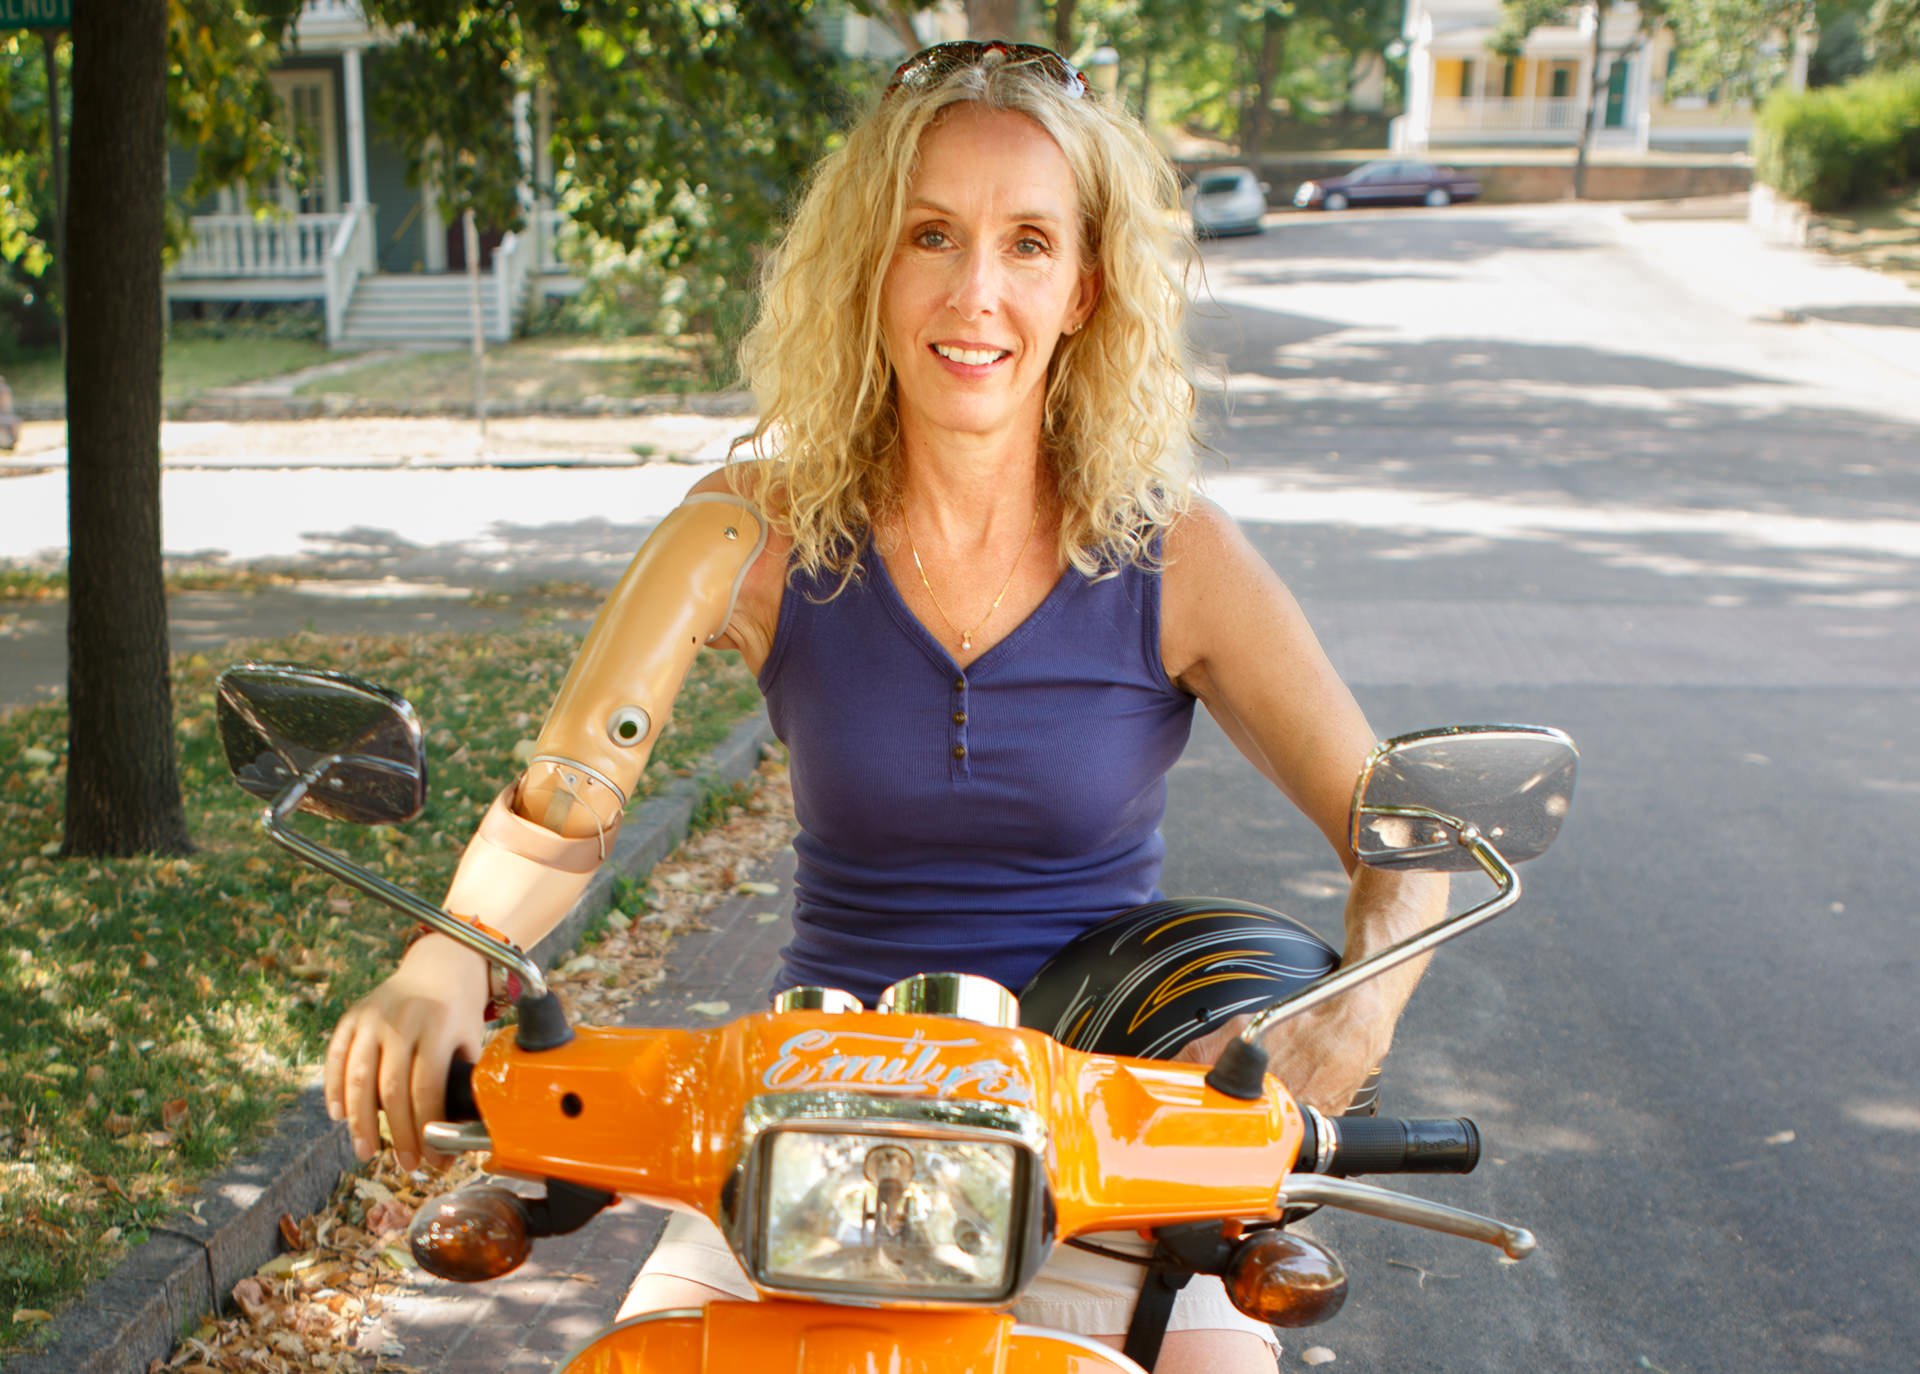 Sherri McCall on her scooter - Emily - with her transhumeral myoelectric prosthesis